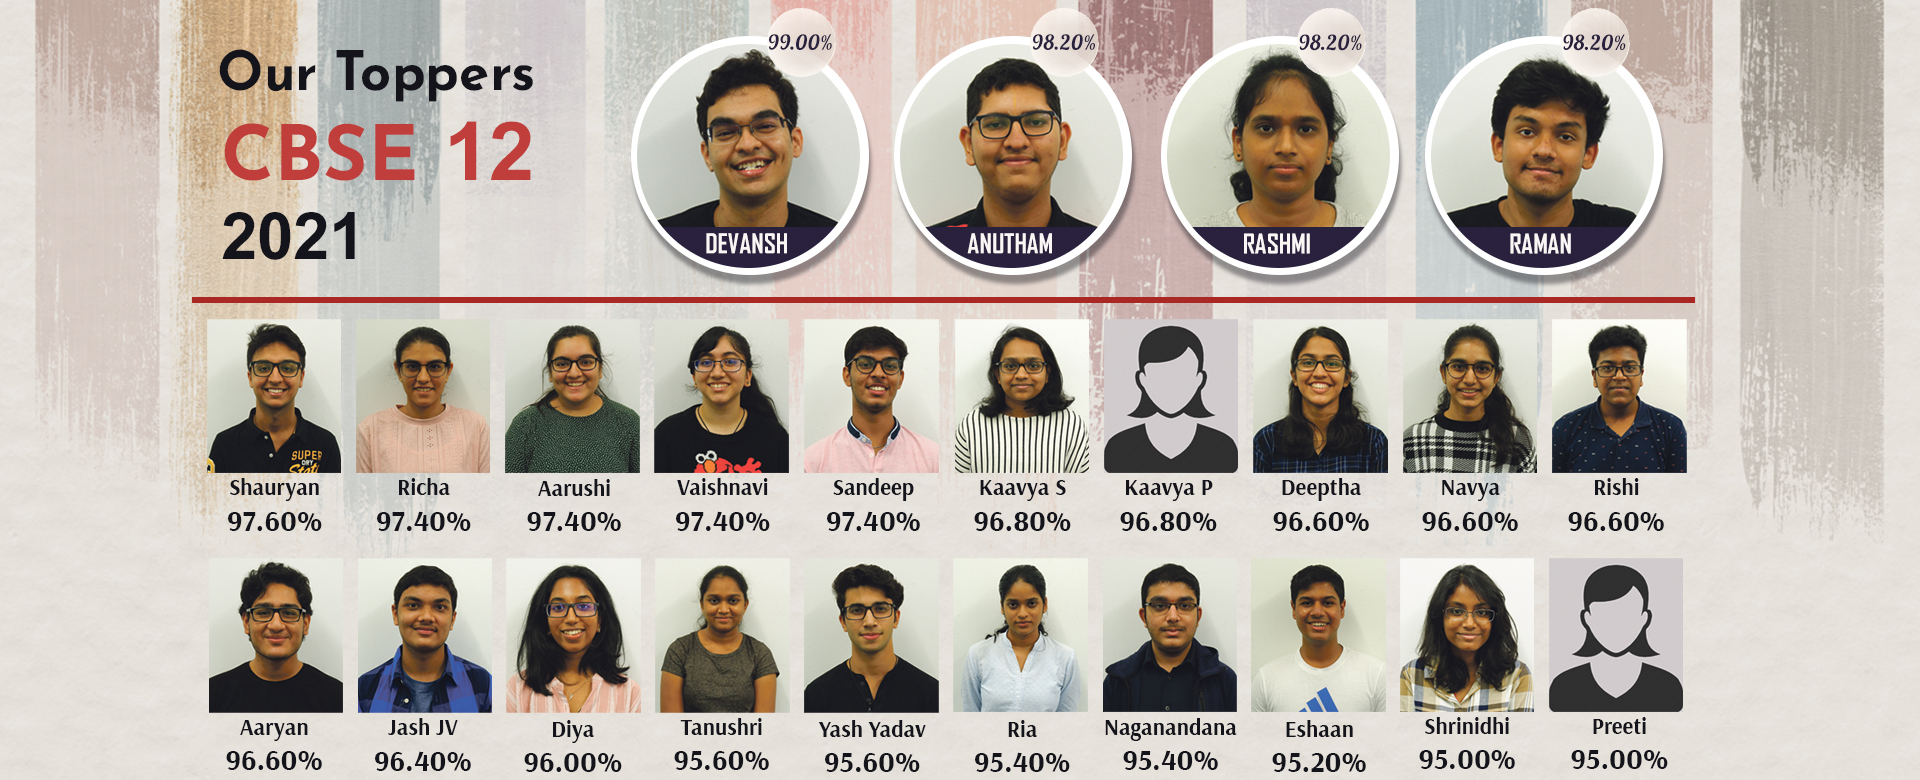 CBSE 12 Toppers 2021